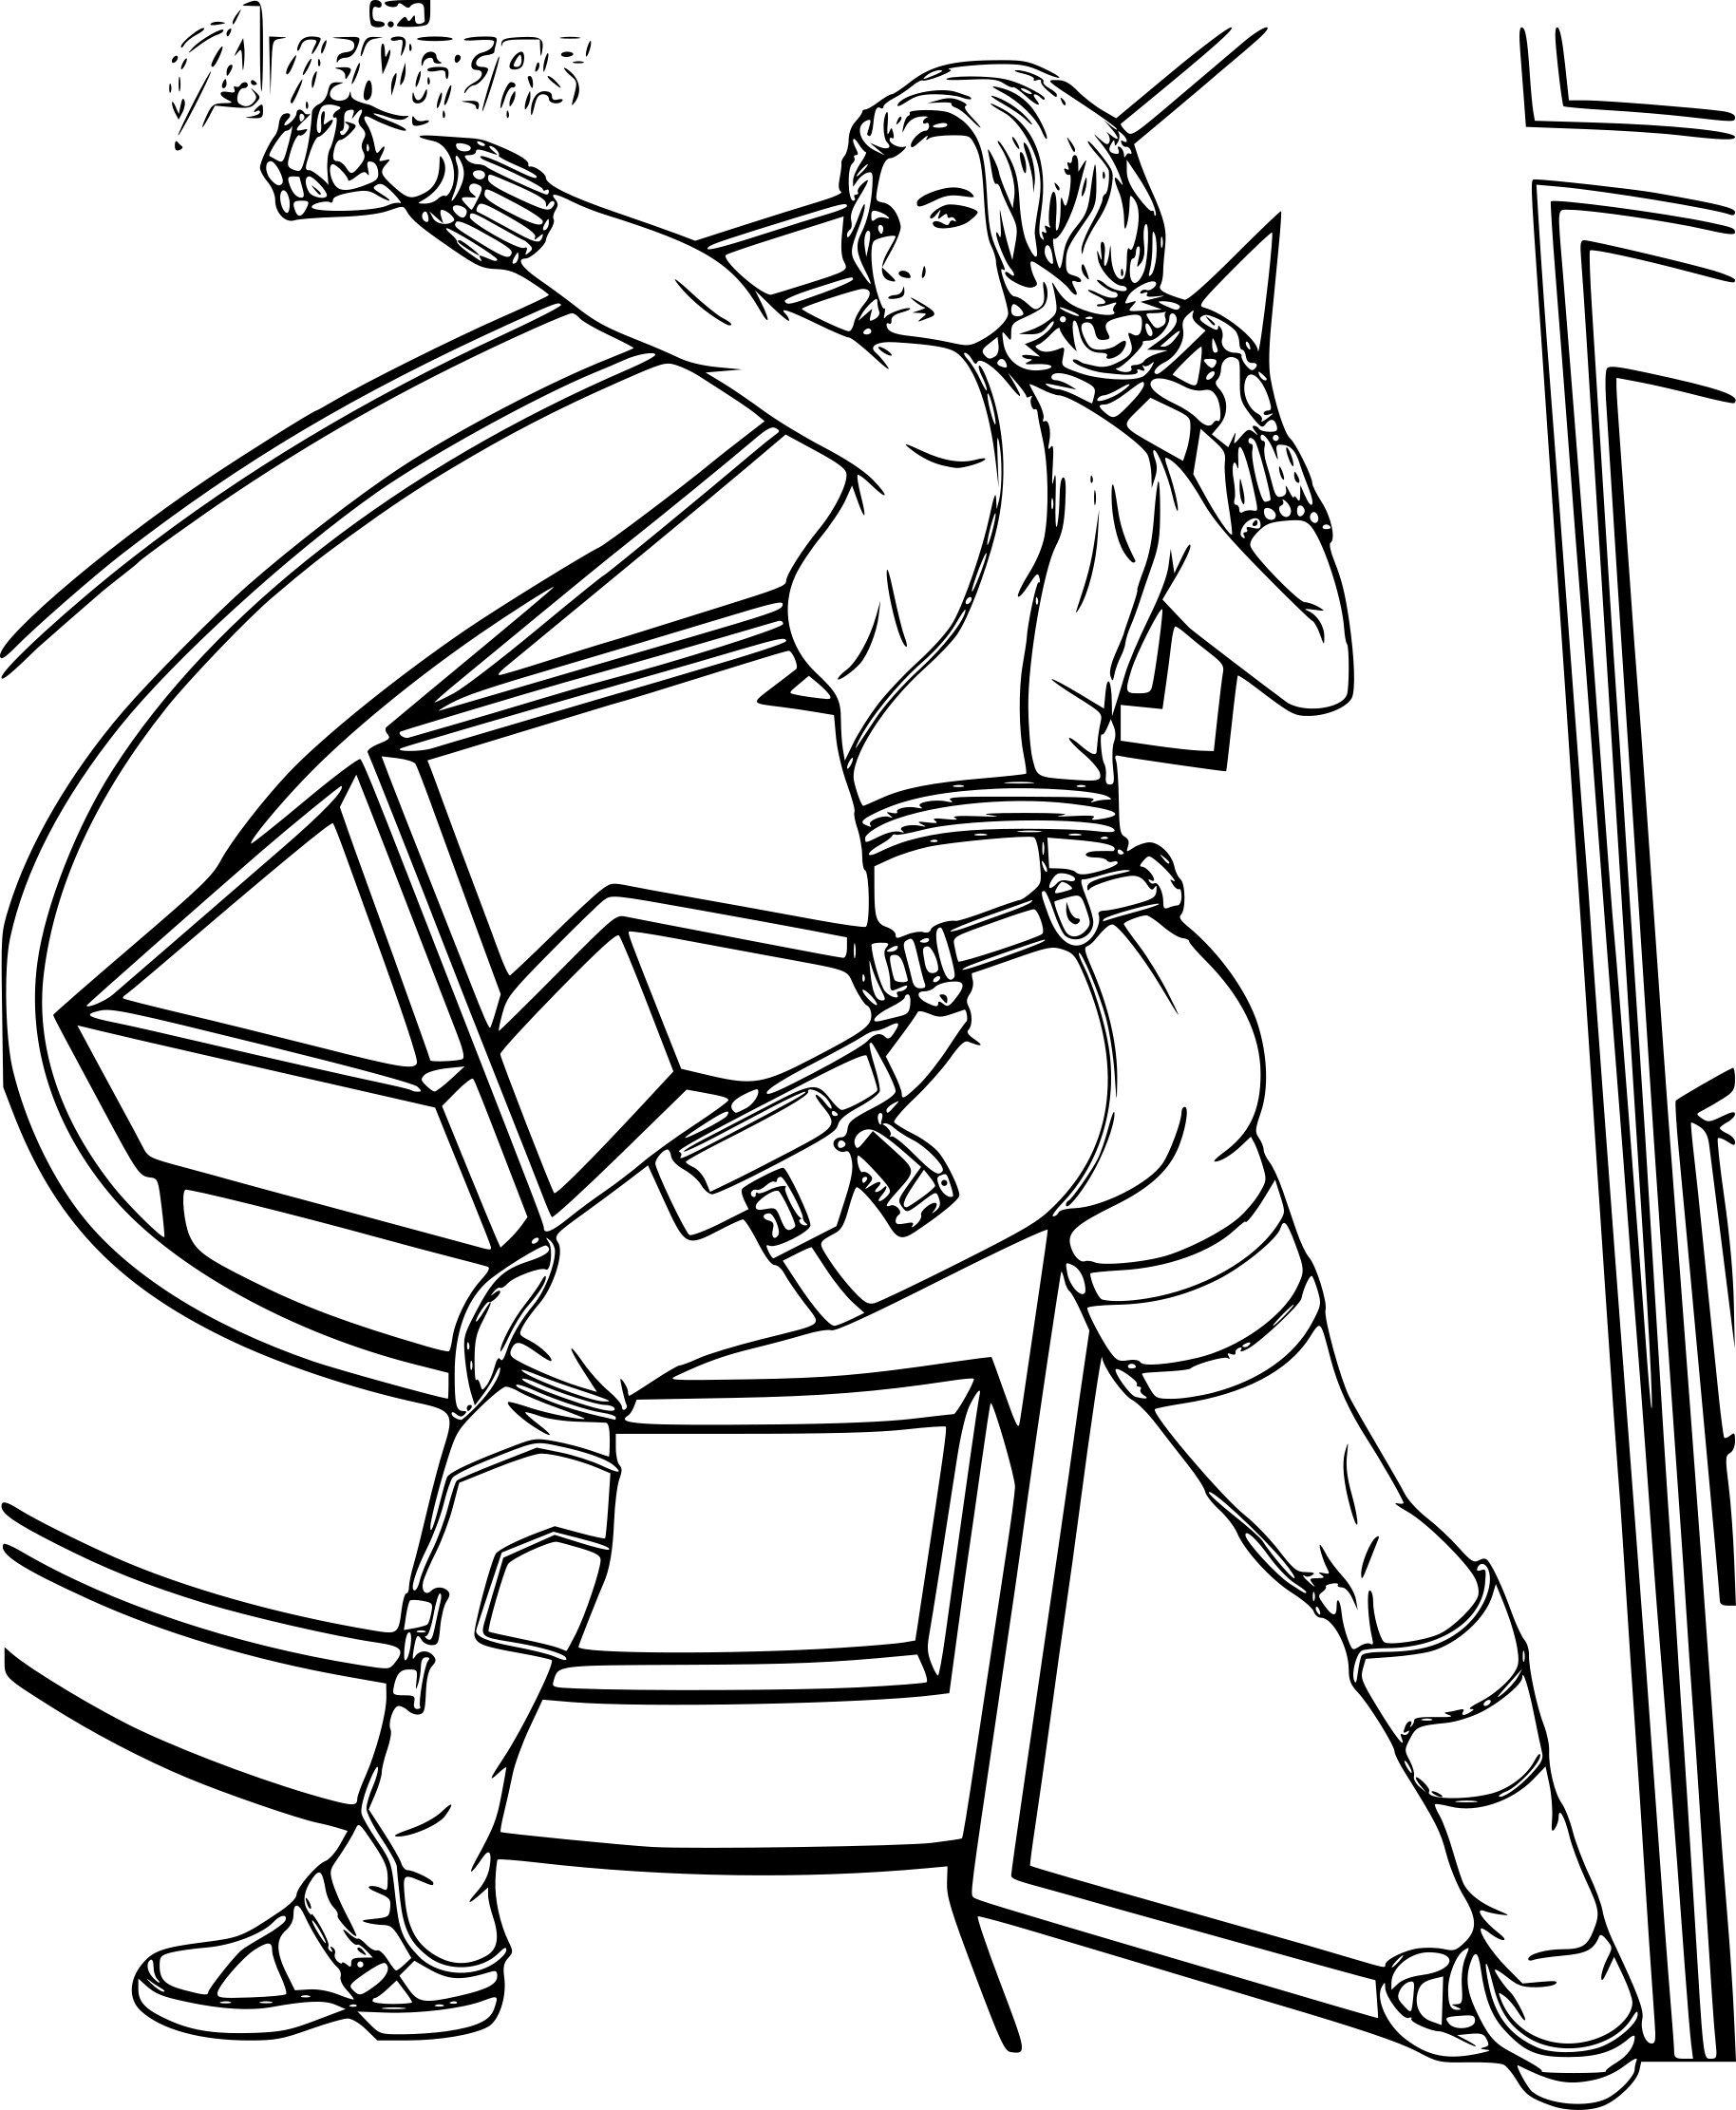 Avengers Black Widow coloring page